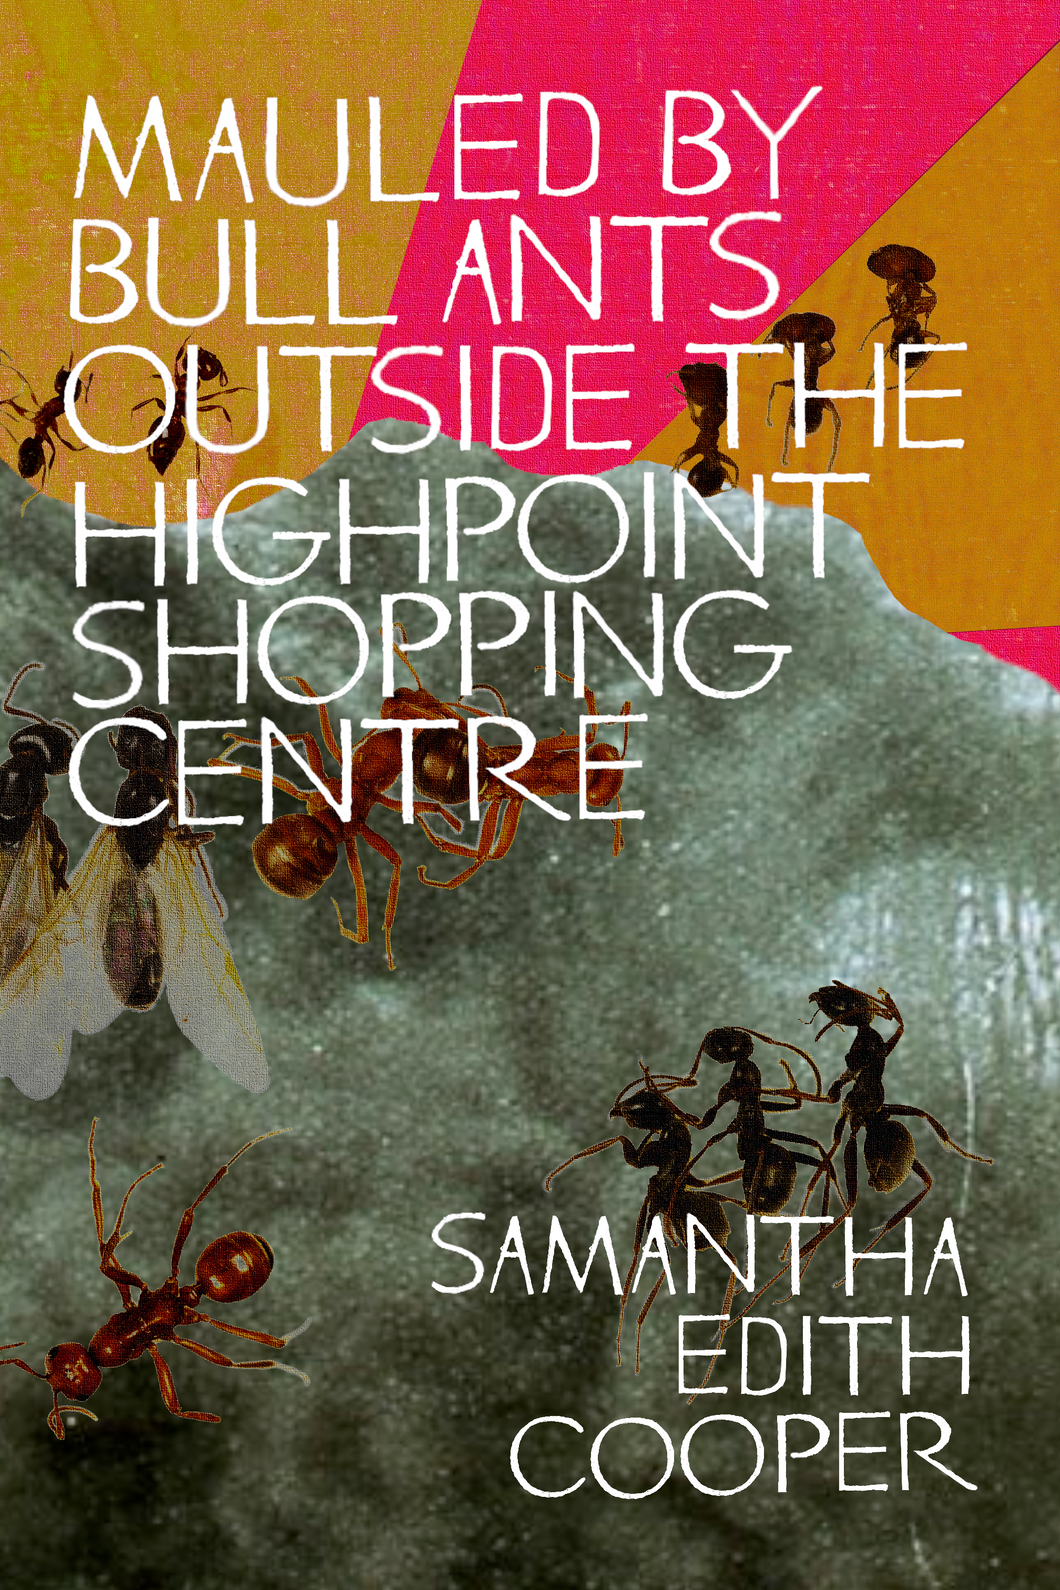 Mauled by Bull Ants Outside the Highpoint Shopping Centre, by Samantha Edith Cooper-Print Books-Bottlecap Press